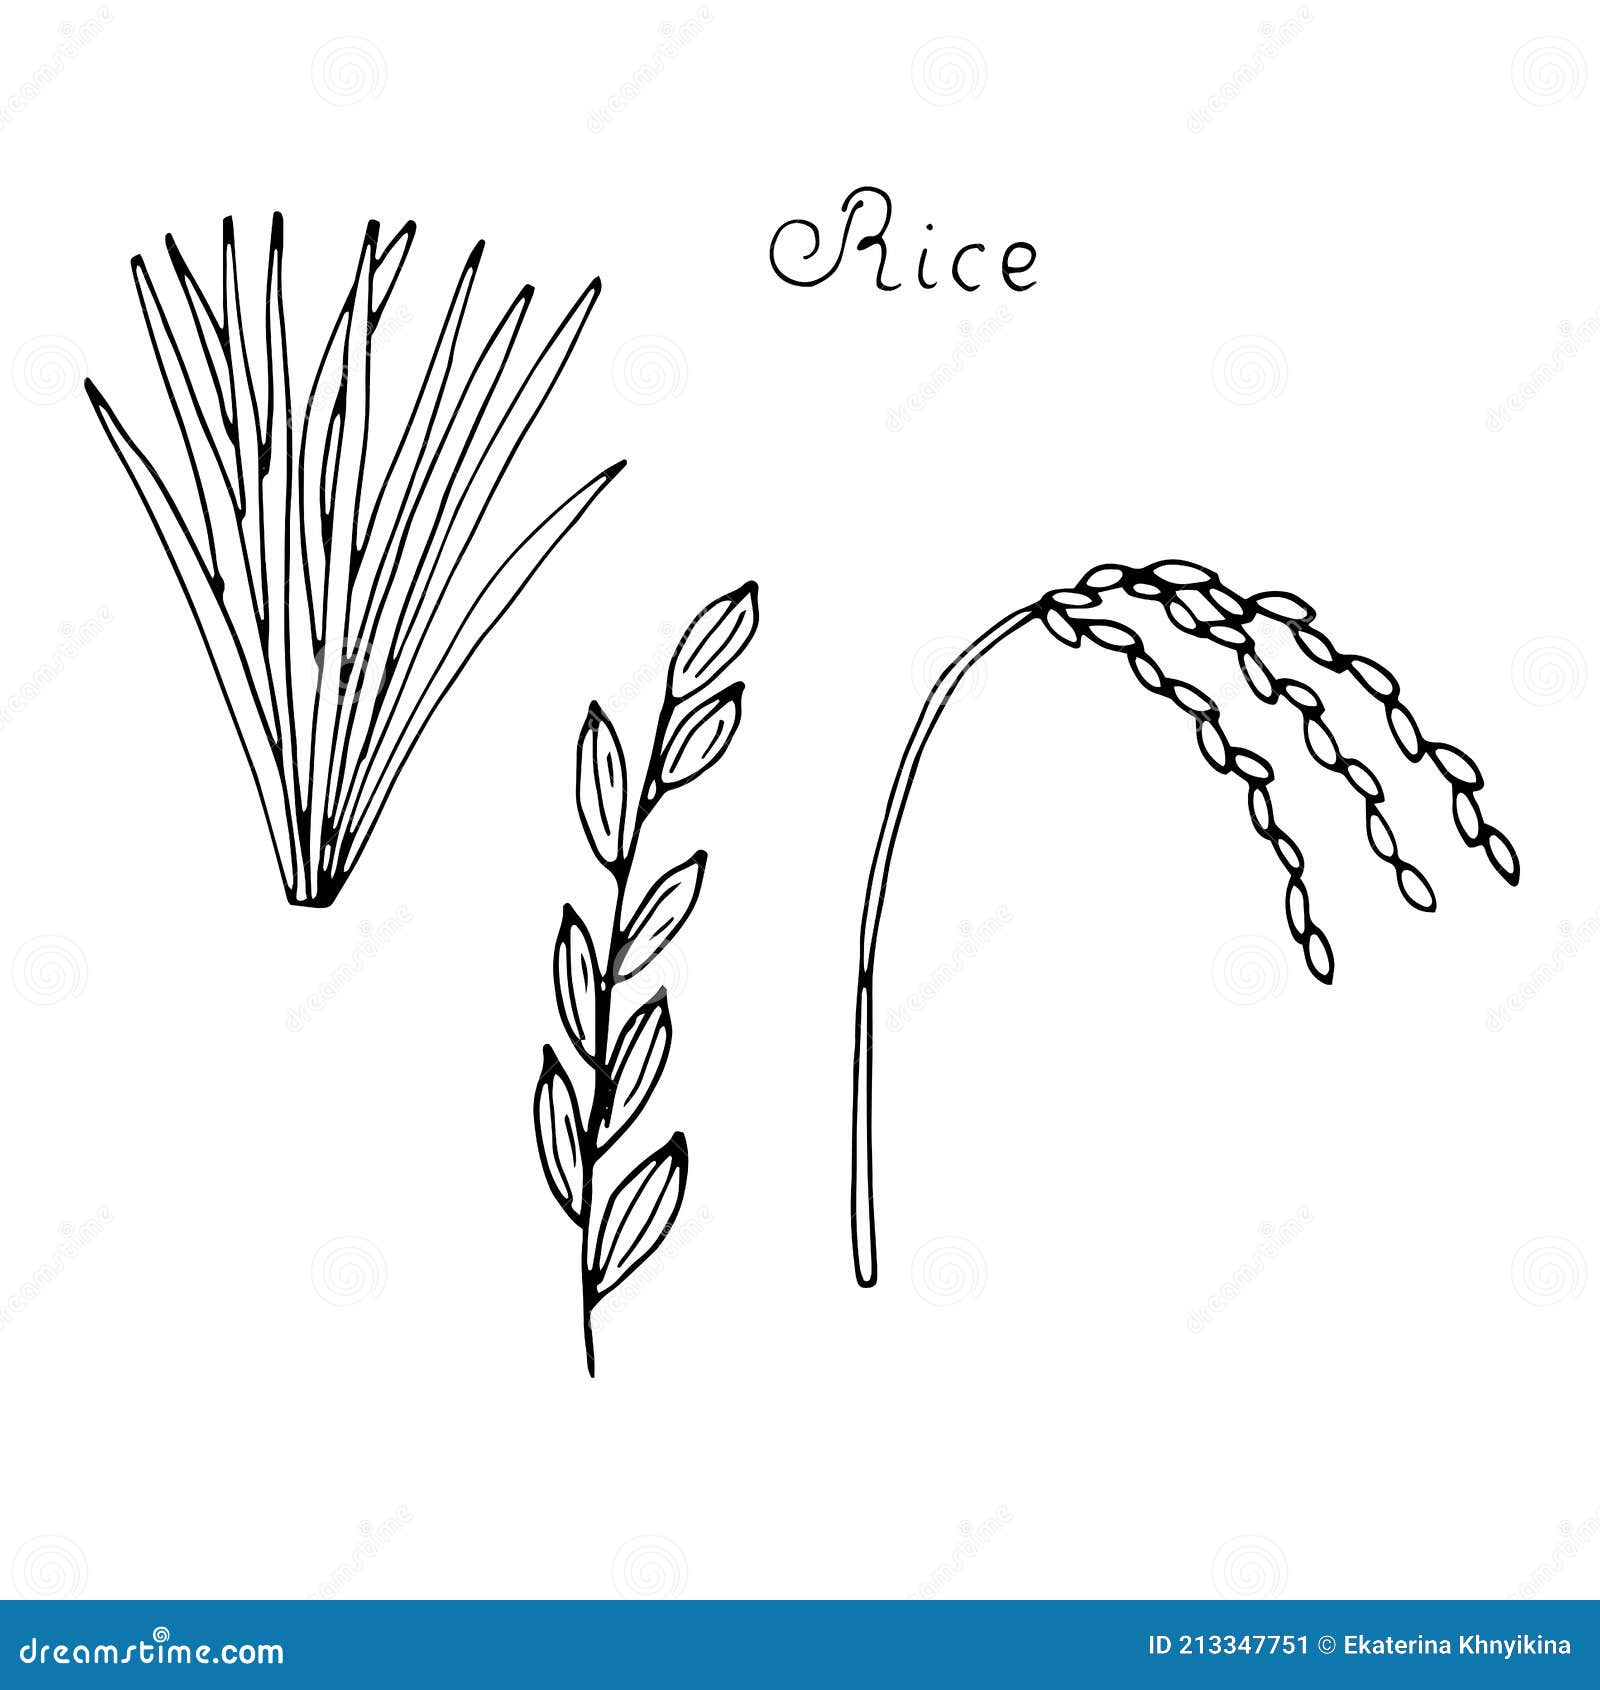 Share 154+ rice crop drawing best